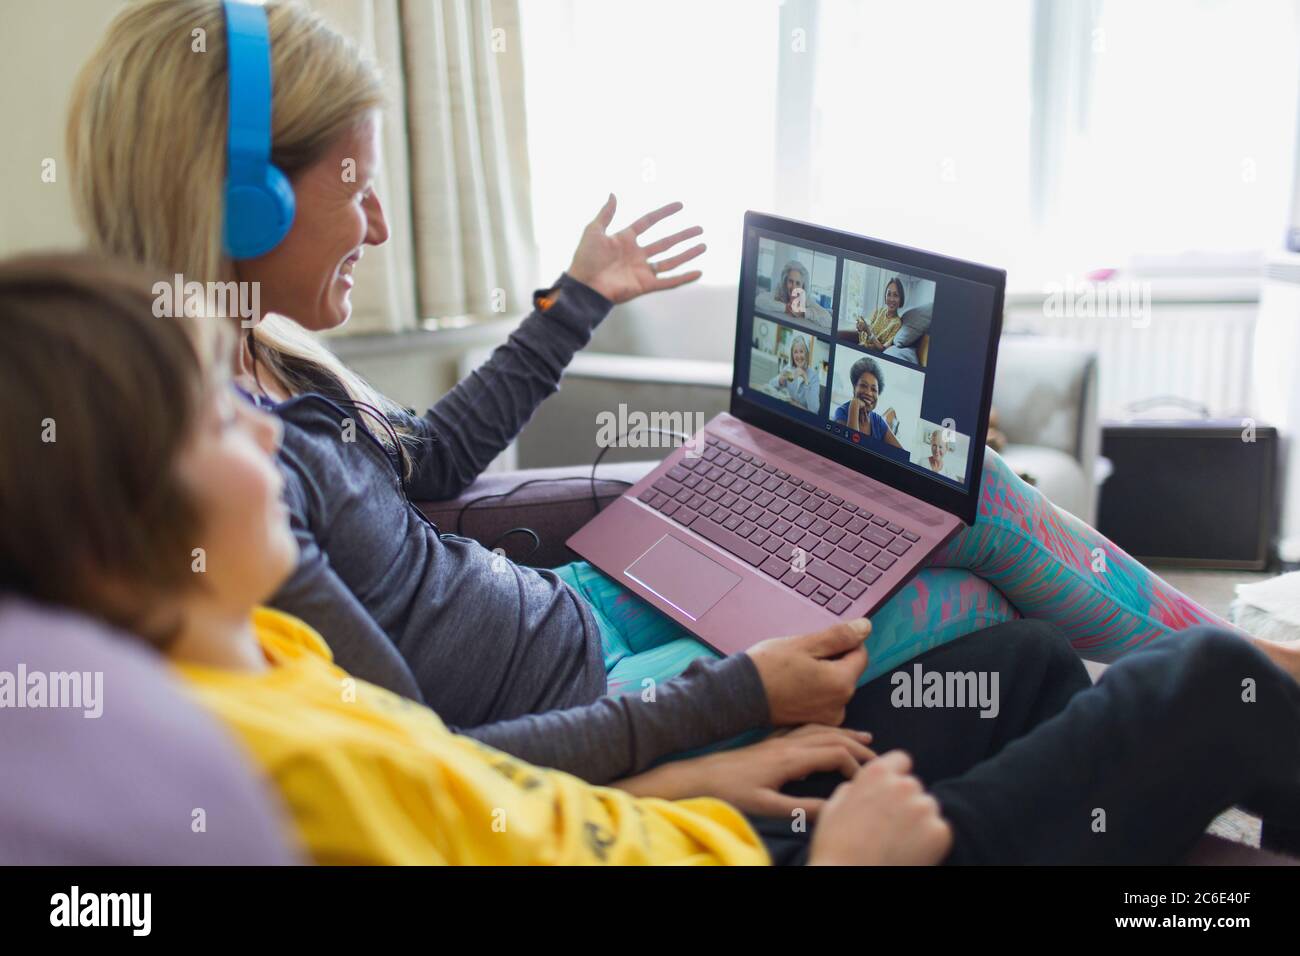 Mother and son with laptop video chatting on sofa Stock Photo